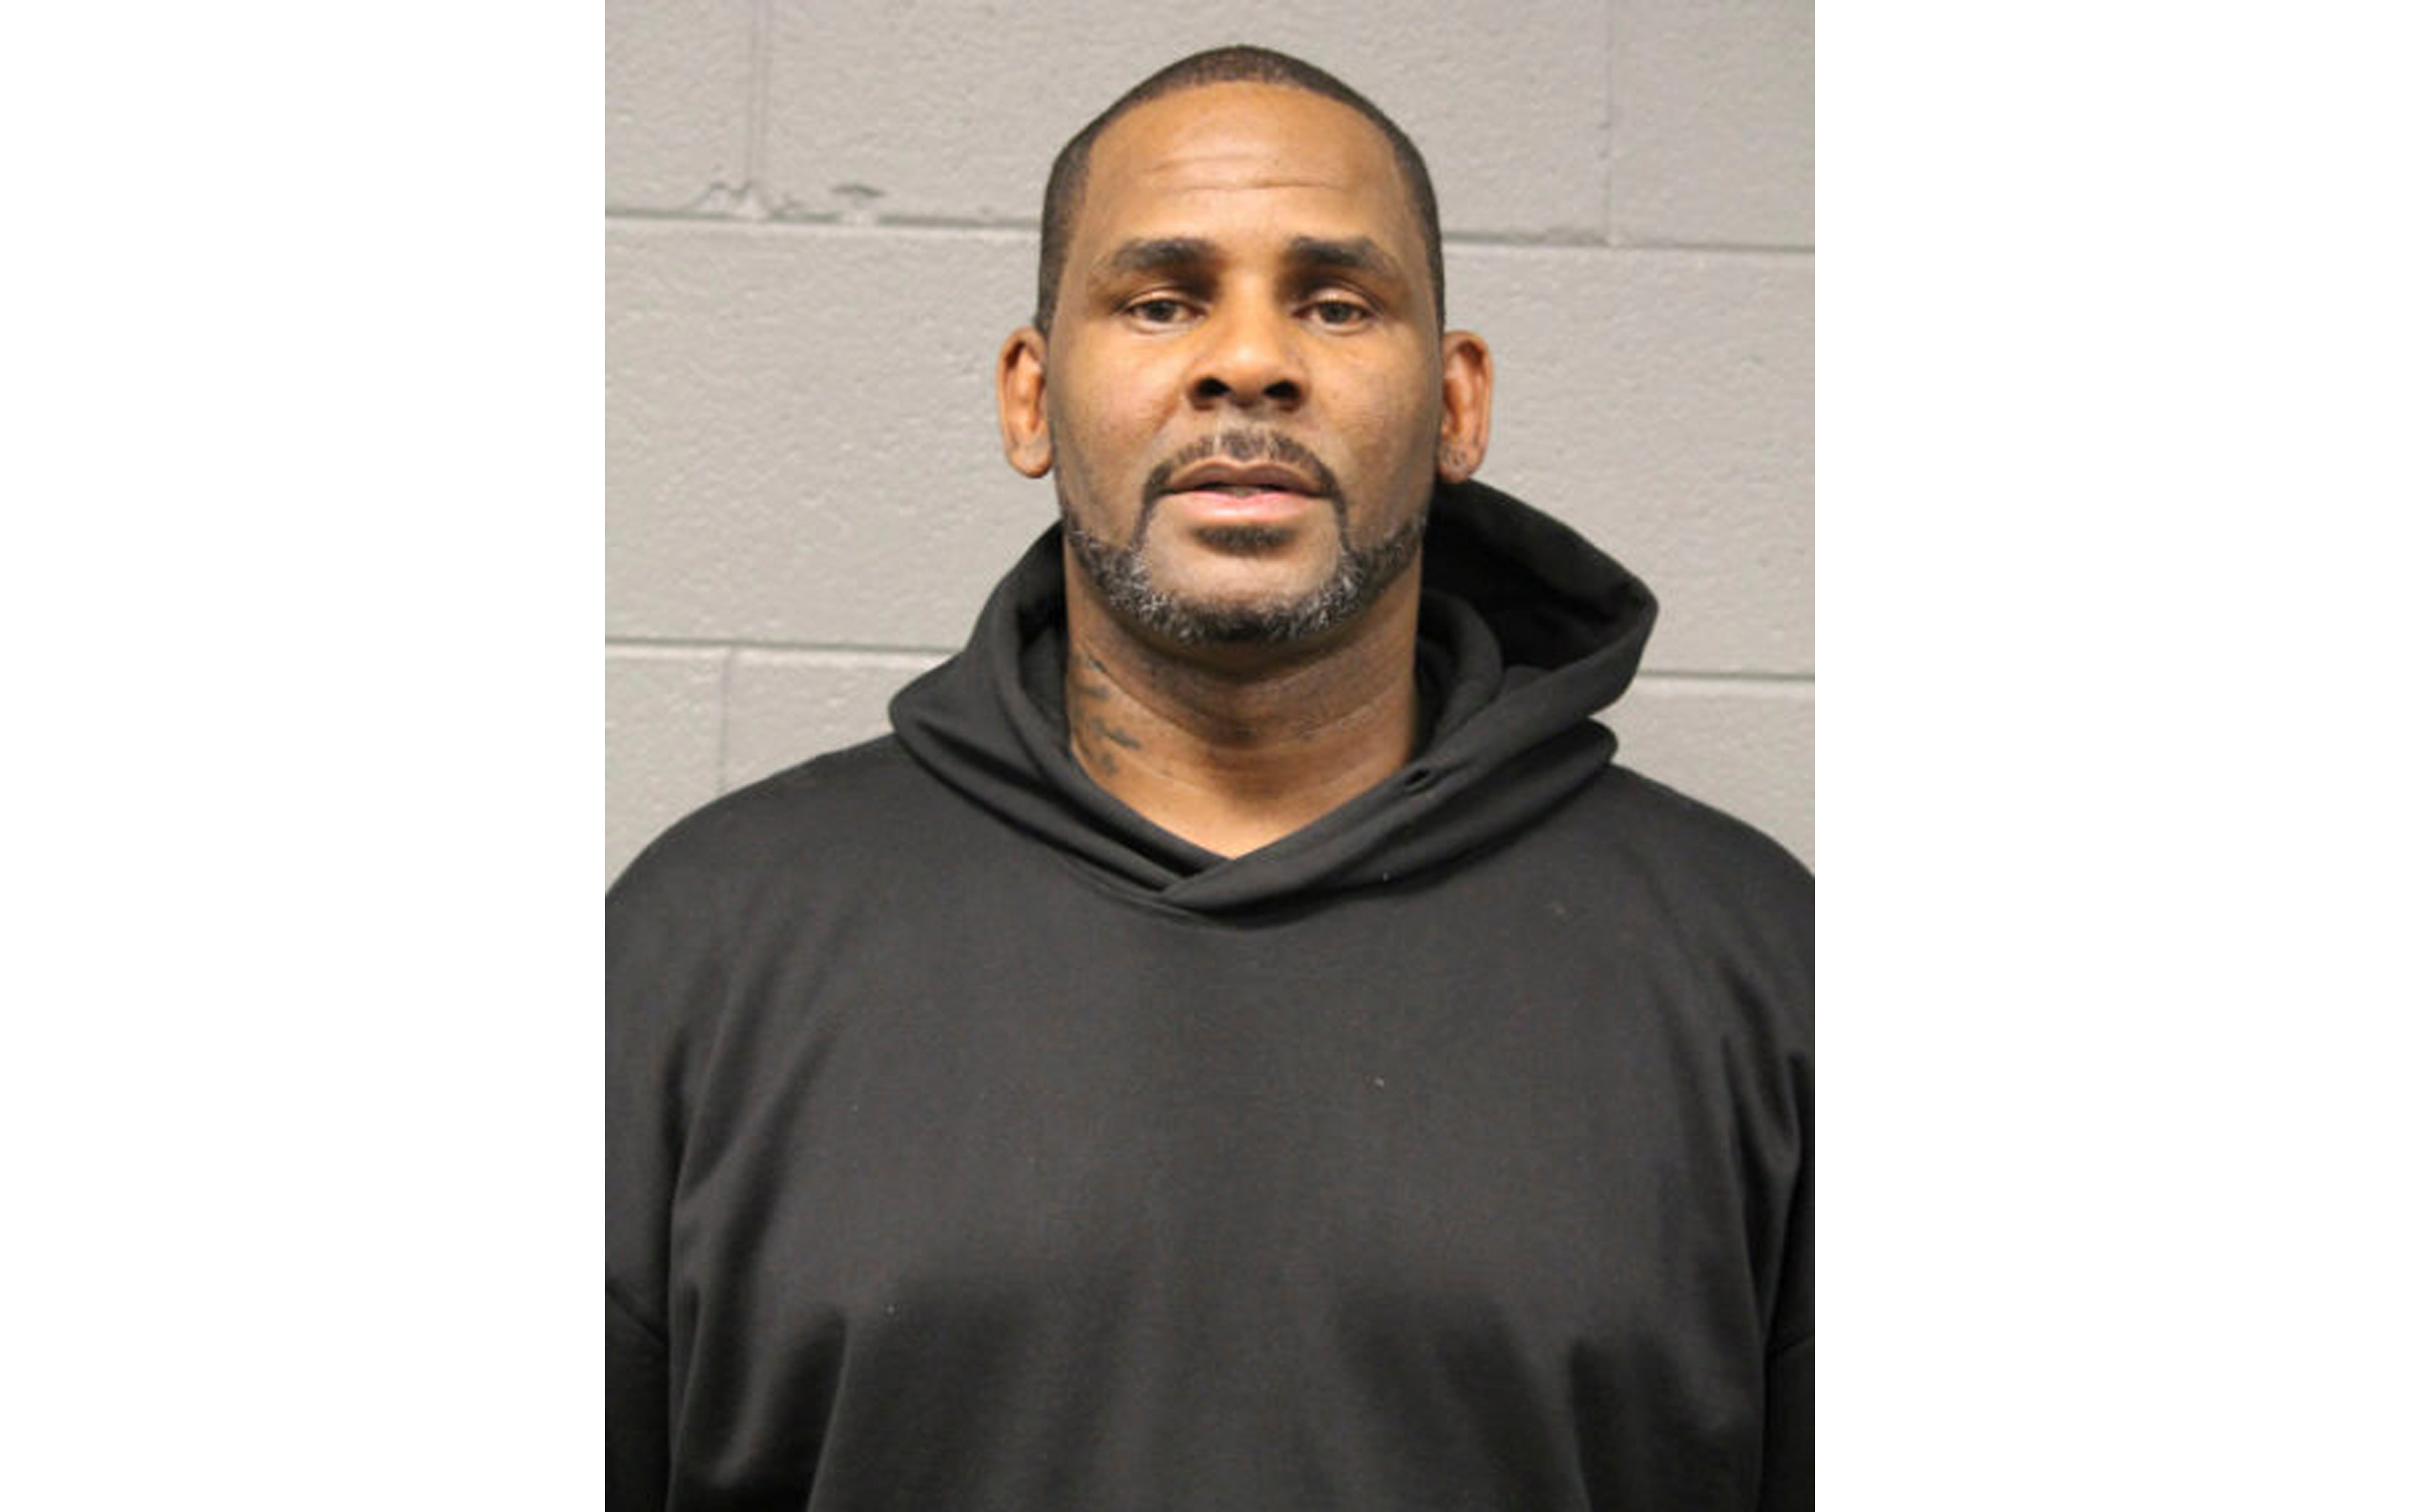 In this photo taken and released by the Chicago Police Dept., Friday, Feb. 22, 2019, singer R. Kelly is photographed during booking at a police station in Chicago, Il. R. Kelly, the R&B star who has been trailed for decades by allegations that he violated underage girls and women and held some as virtual slaves, is being charged with aggravated sexual abuse involving four victims, including at least three between the ages of 13 and 17. (AP)